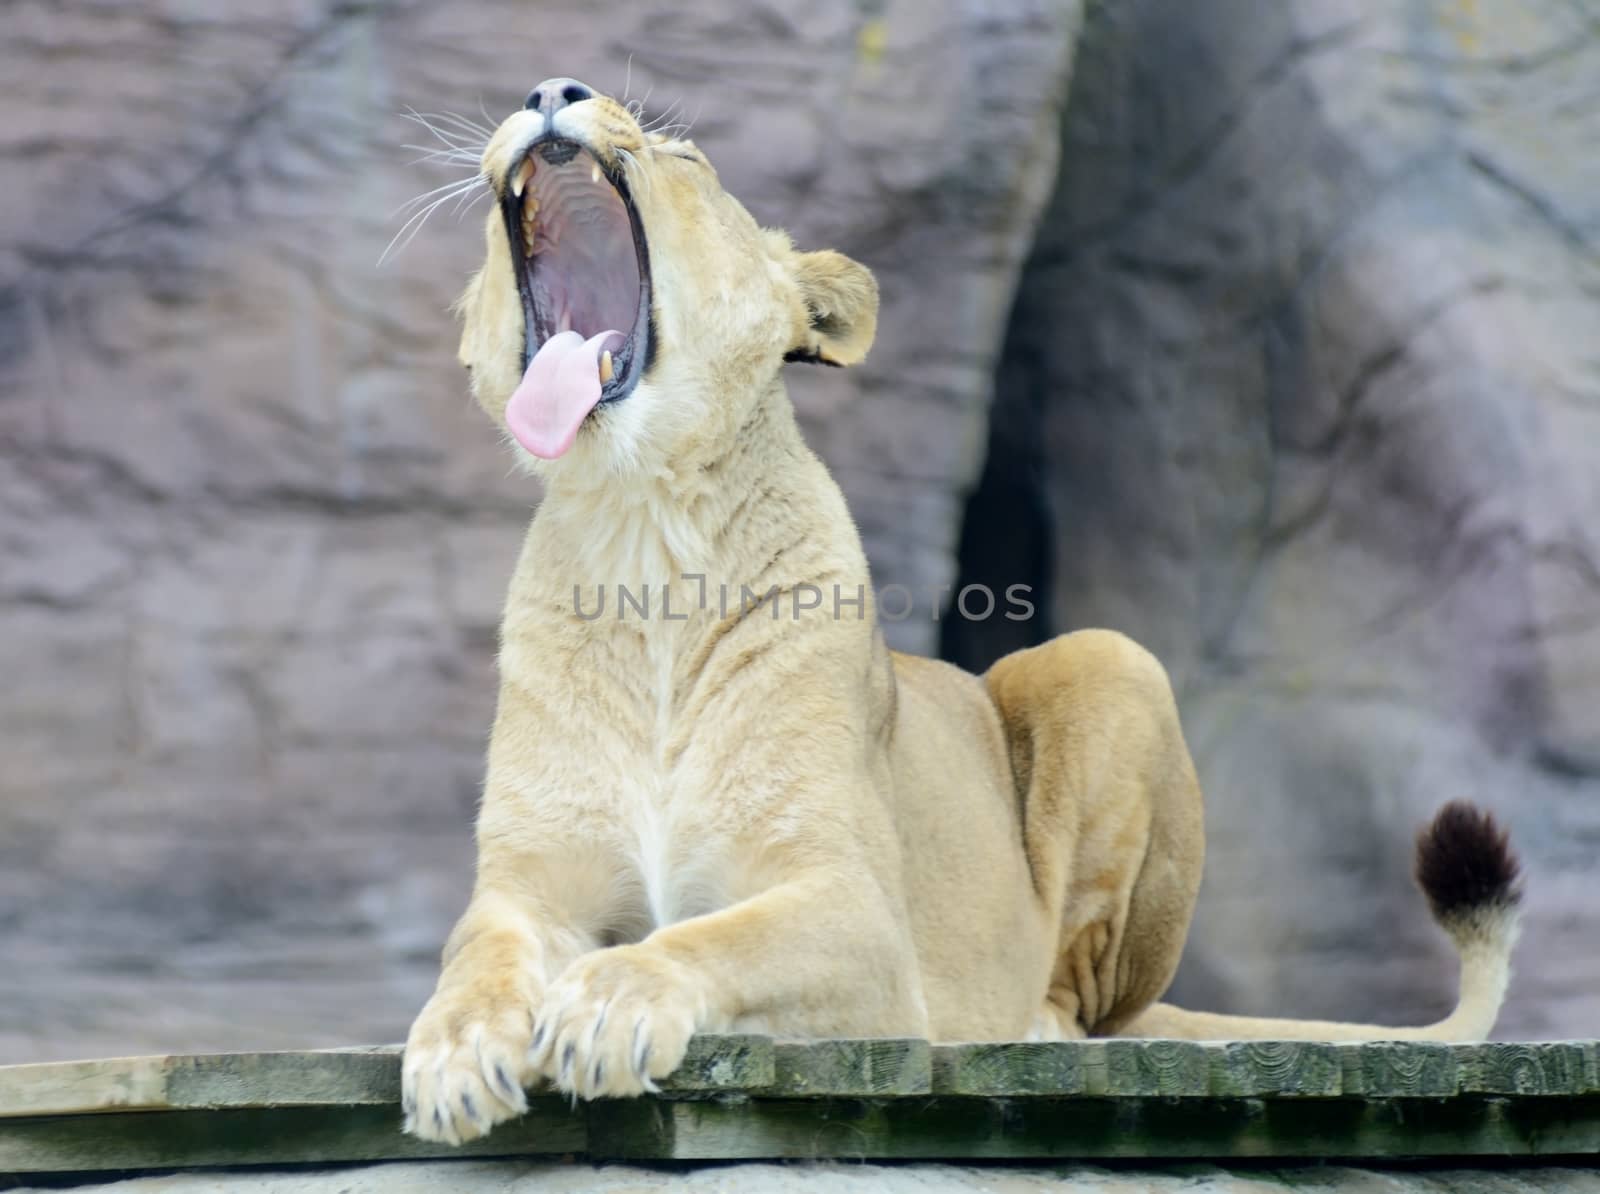 Lioness is yawning showing teeth and tongue